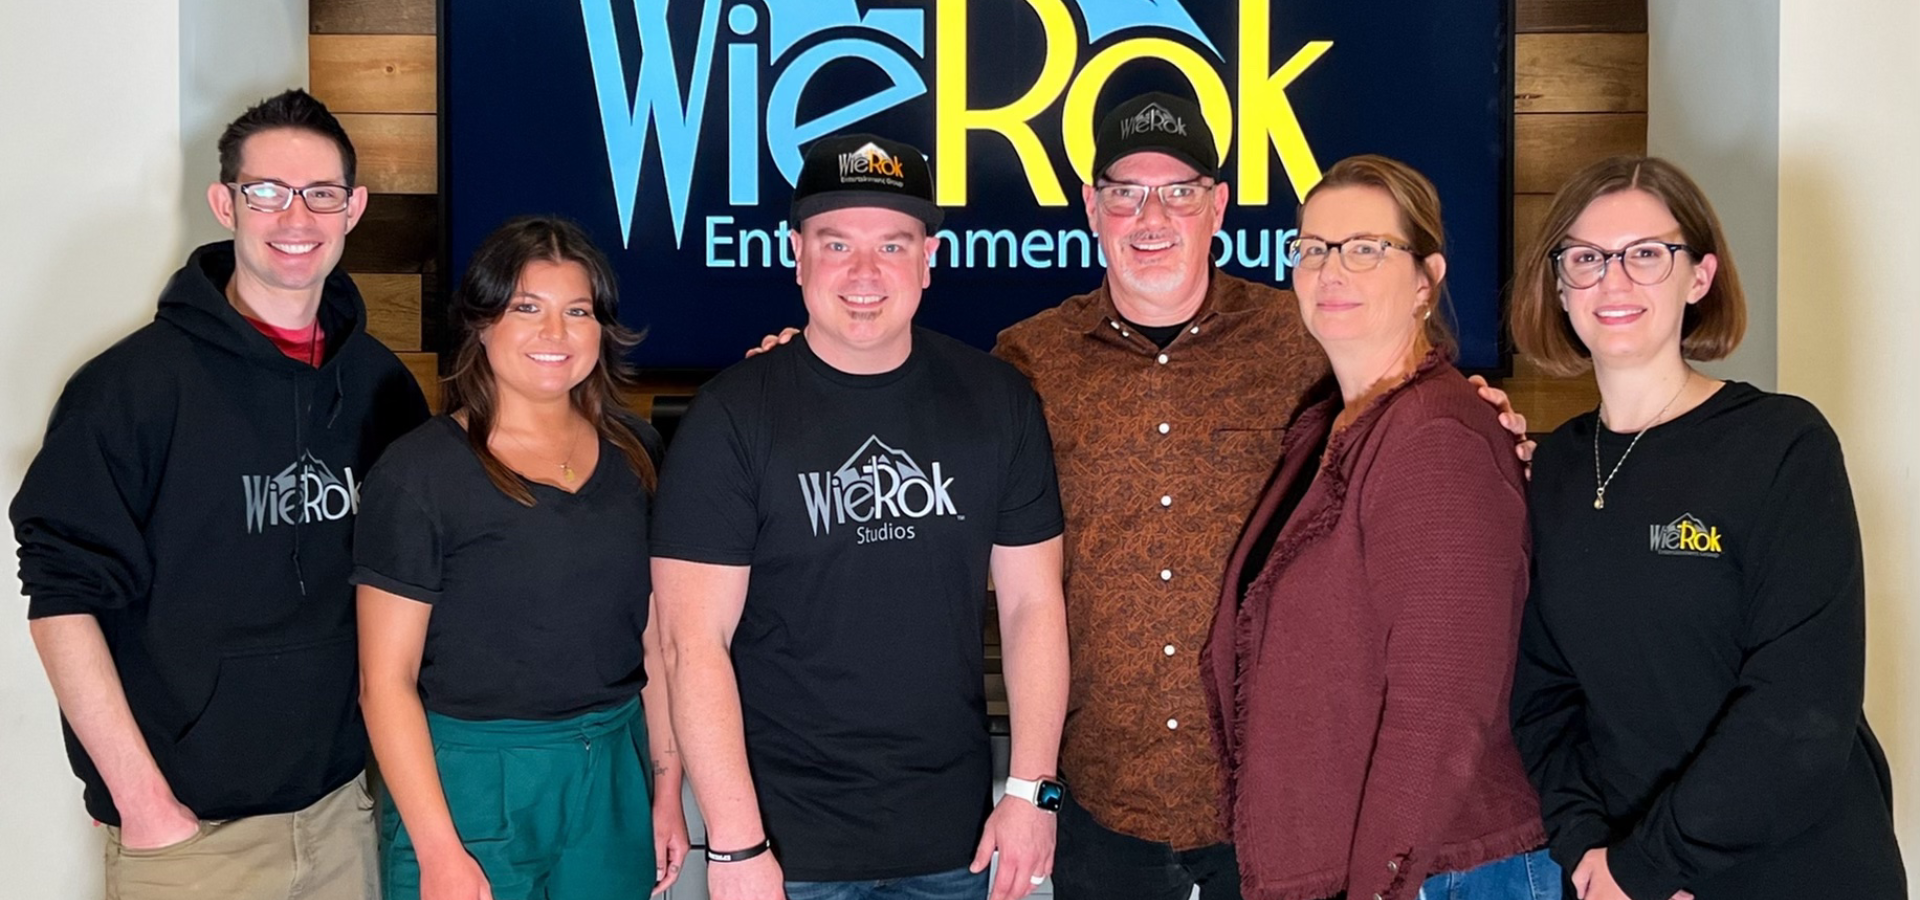 WieRok Entertainment Announces Hiring Of Kevin Sparkman As Director of Marketing And Operations